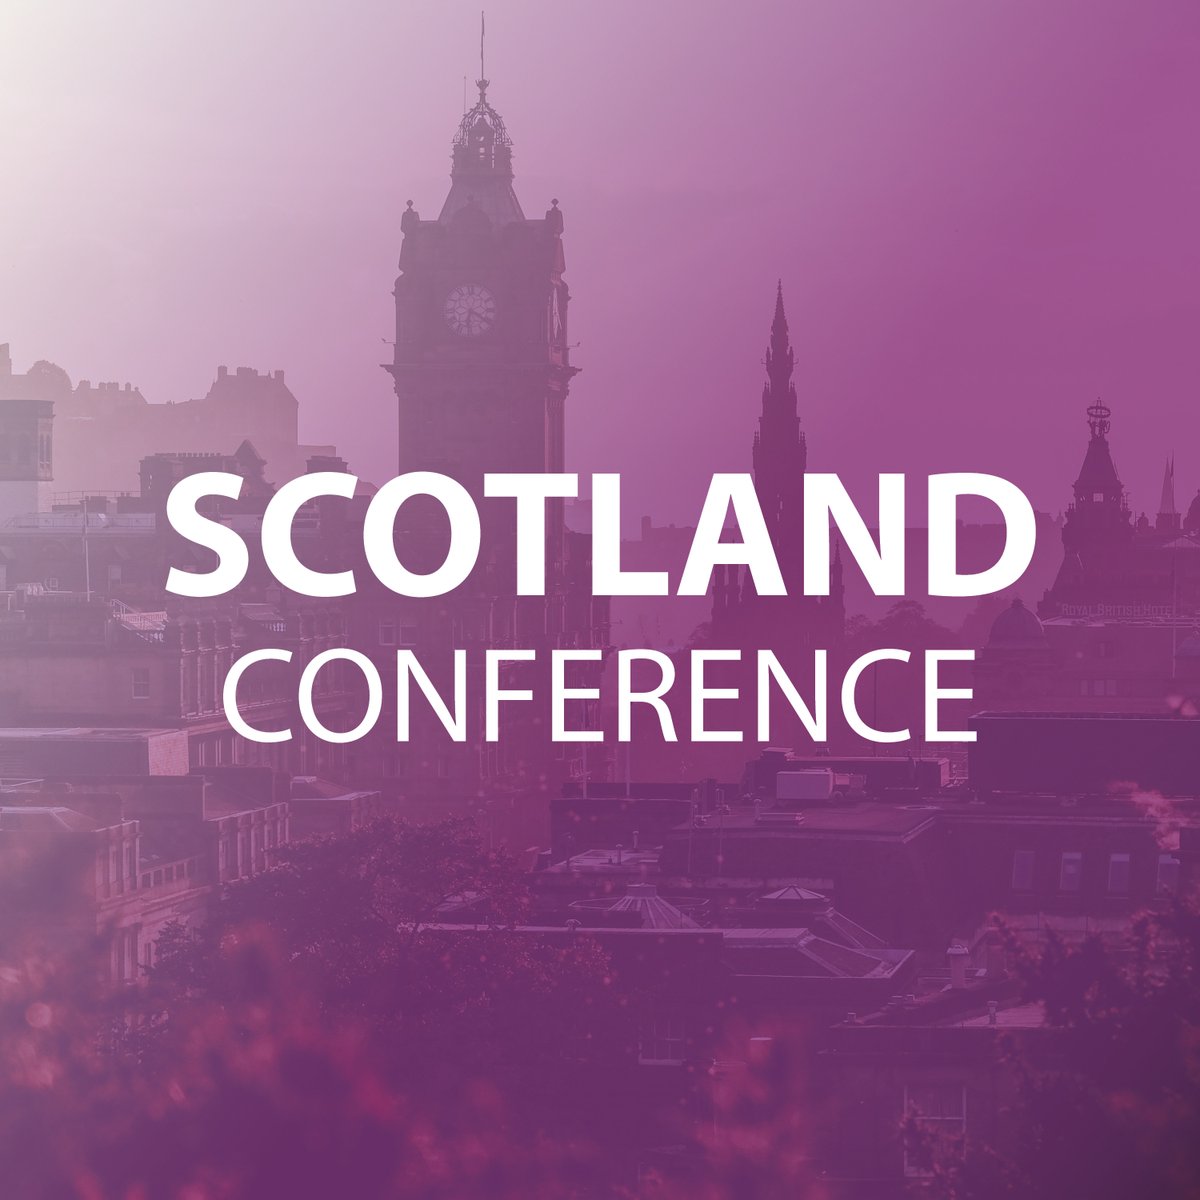 🌄 Save 15% off your #SolaceScotland conference tickets in Midlothian this September with an early bird discount. Don't delay! ⌛DEAL ENDS 31/3. Secure your spot today to gain insights from the expertise of #localgov leaders 👉bit.ly/4abWwlW